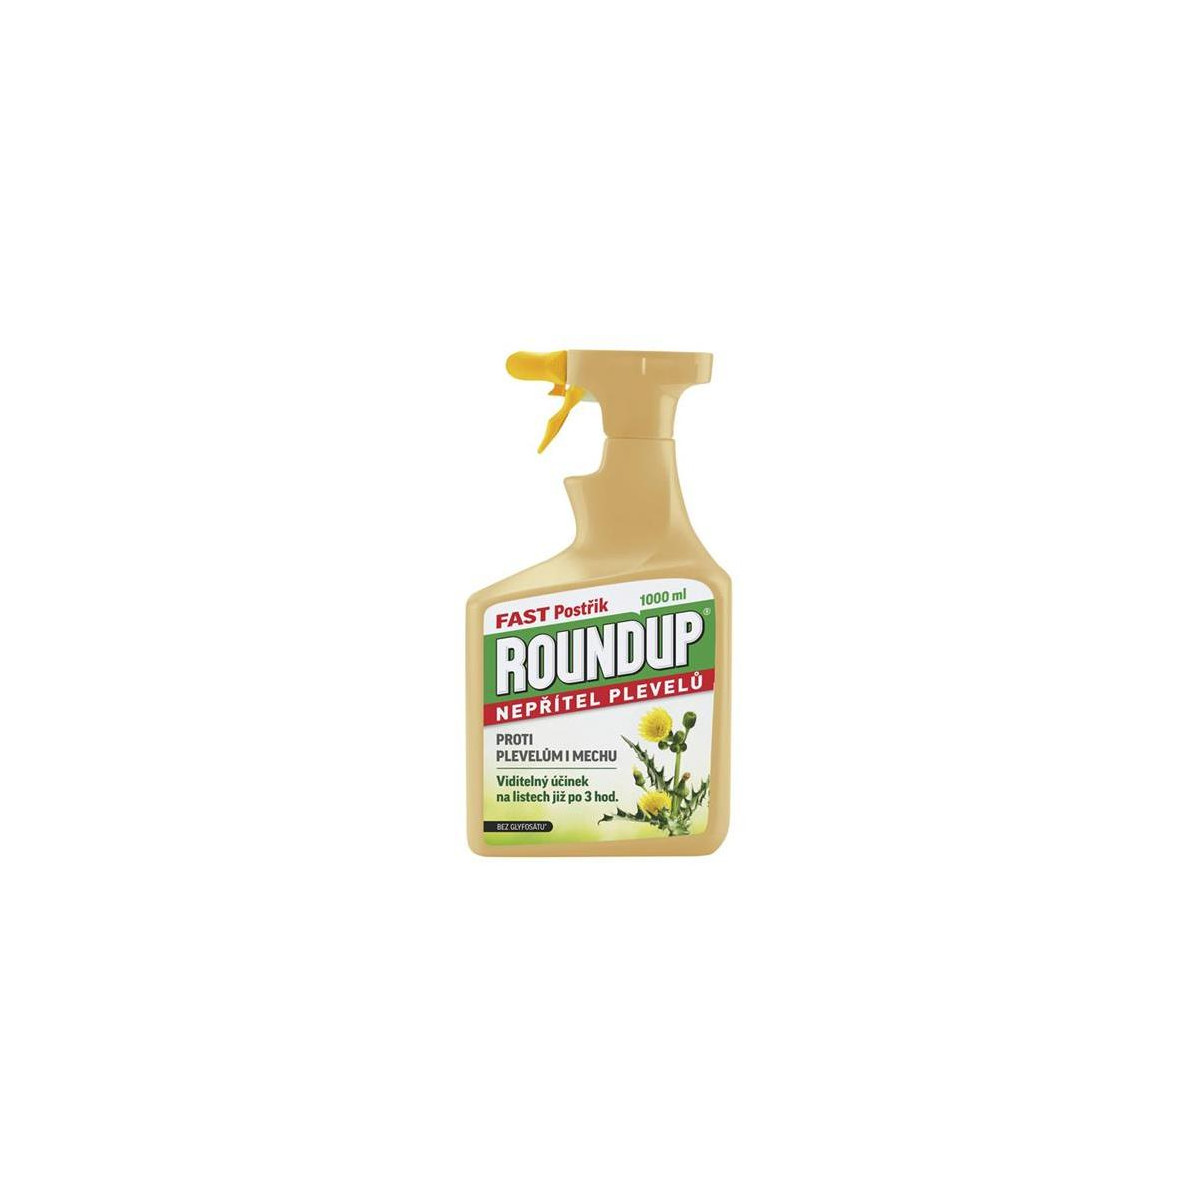 More about ROUNDUP Fast 1l